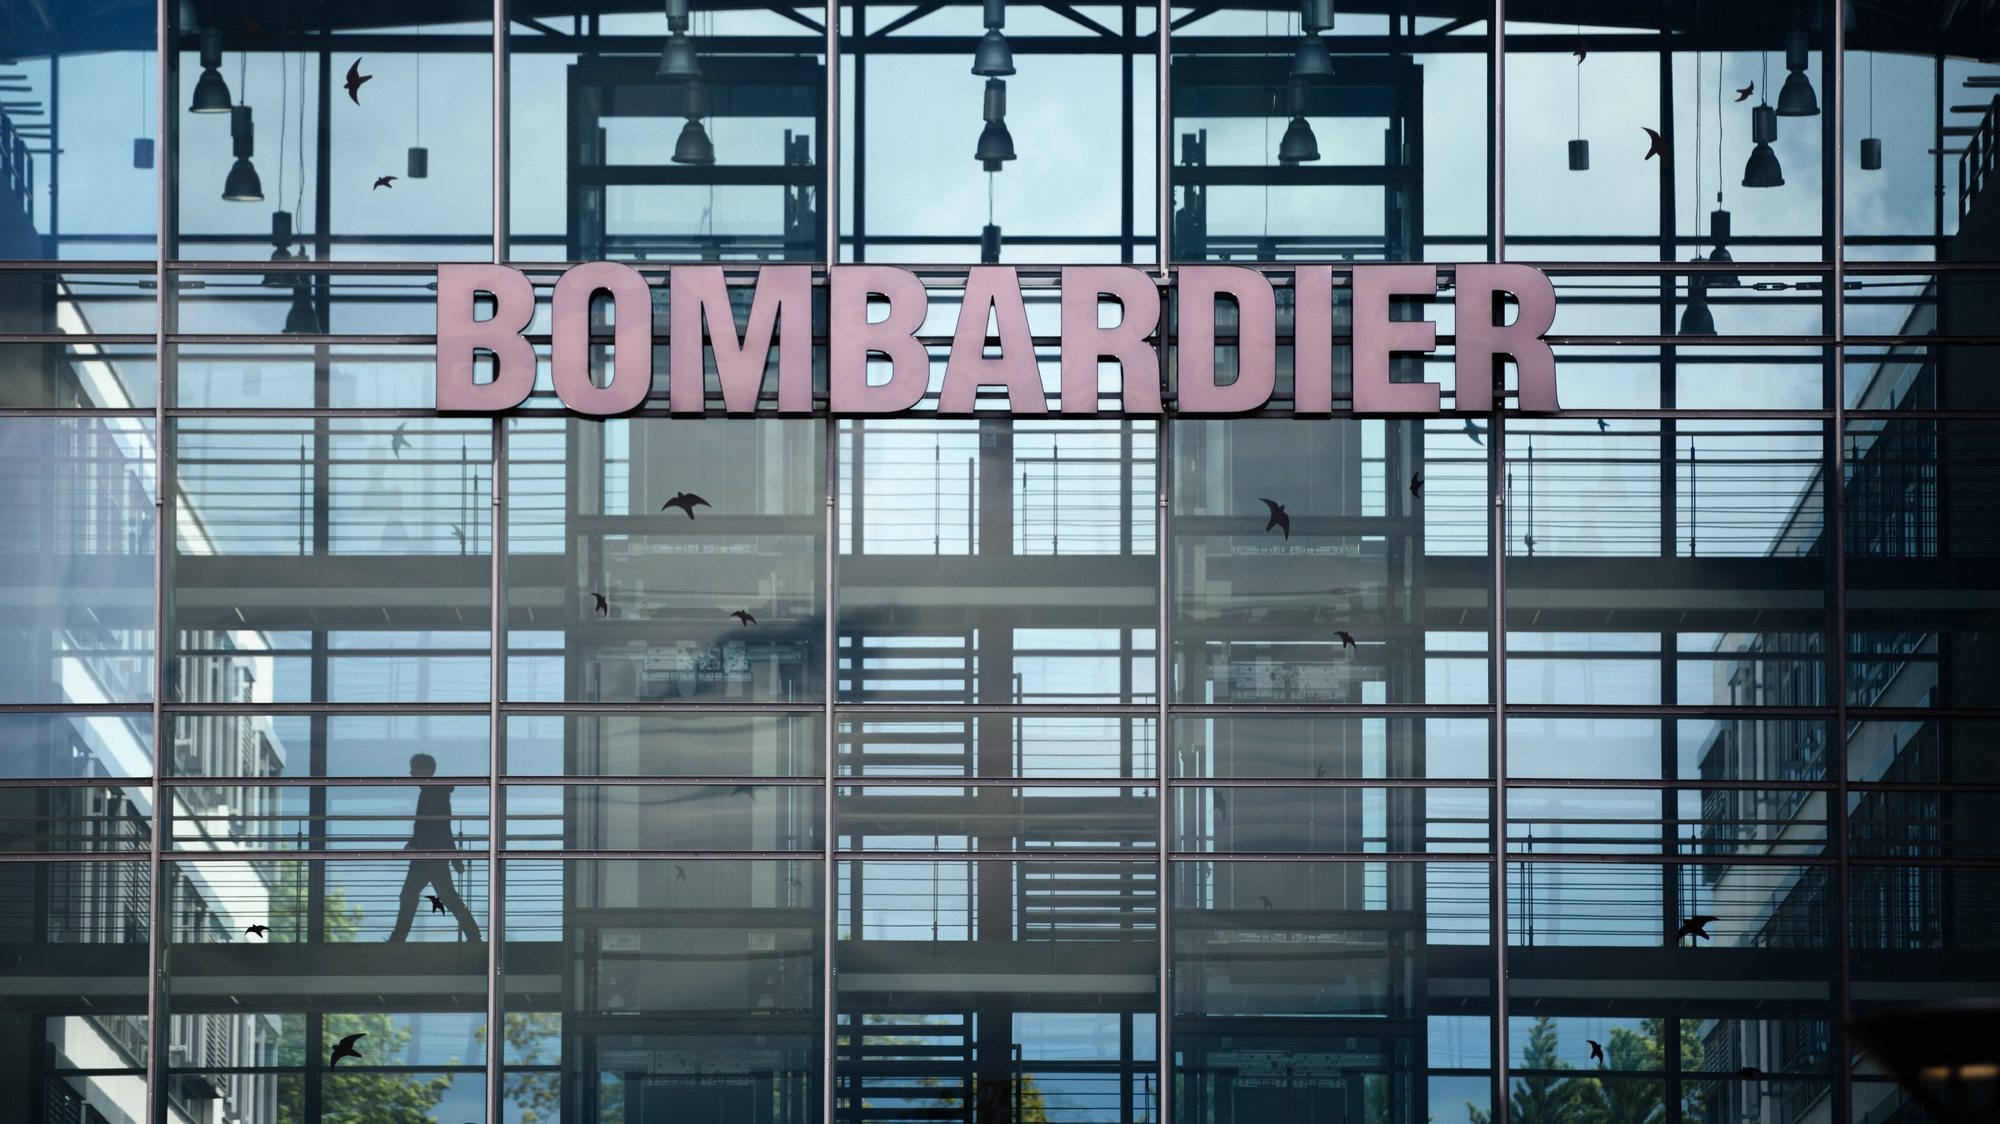 epa08577074 (FILE) - An exterior view of Canadian train manufacturer Bombardier Transportation in Henningsdorf, near Berlin, Germany, 08 July 2019 (reissued 31 July 2020). Reports on 31 July 2020 state the EU competition authorities have on 31 July 2020 agreed to planned takeover of Bombardier Transportation by French Alstom in a deal valued at some 6.2 billion euro, according to German media reports. One condition, however, is that as promised by Alstom, the Bombardier production facilities at the Hennigsdorf site near Berlin will be sold, as the EU Commission announced on 31 July 2020.  EPA/JENS SCHLUETER *** Local Caption *** 55880275